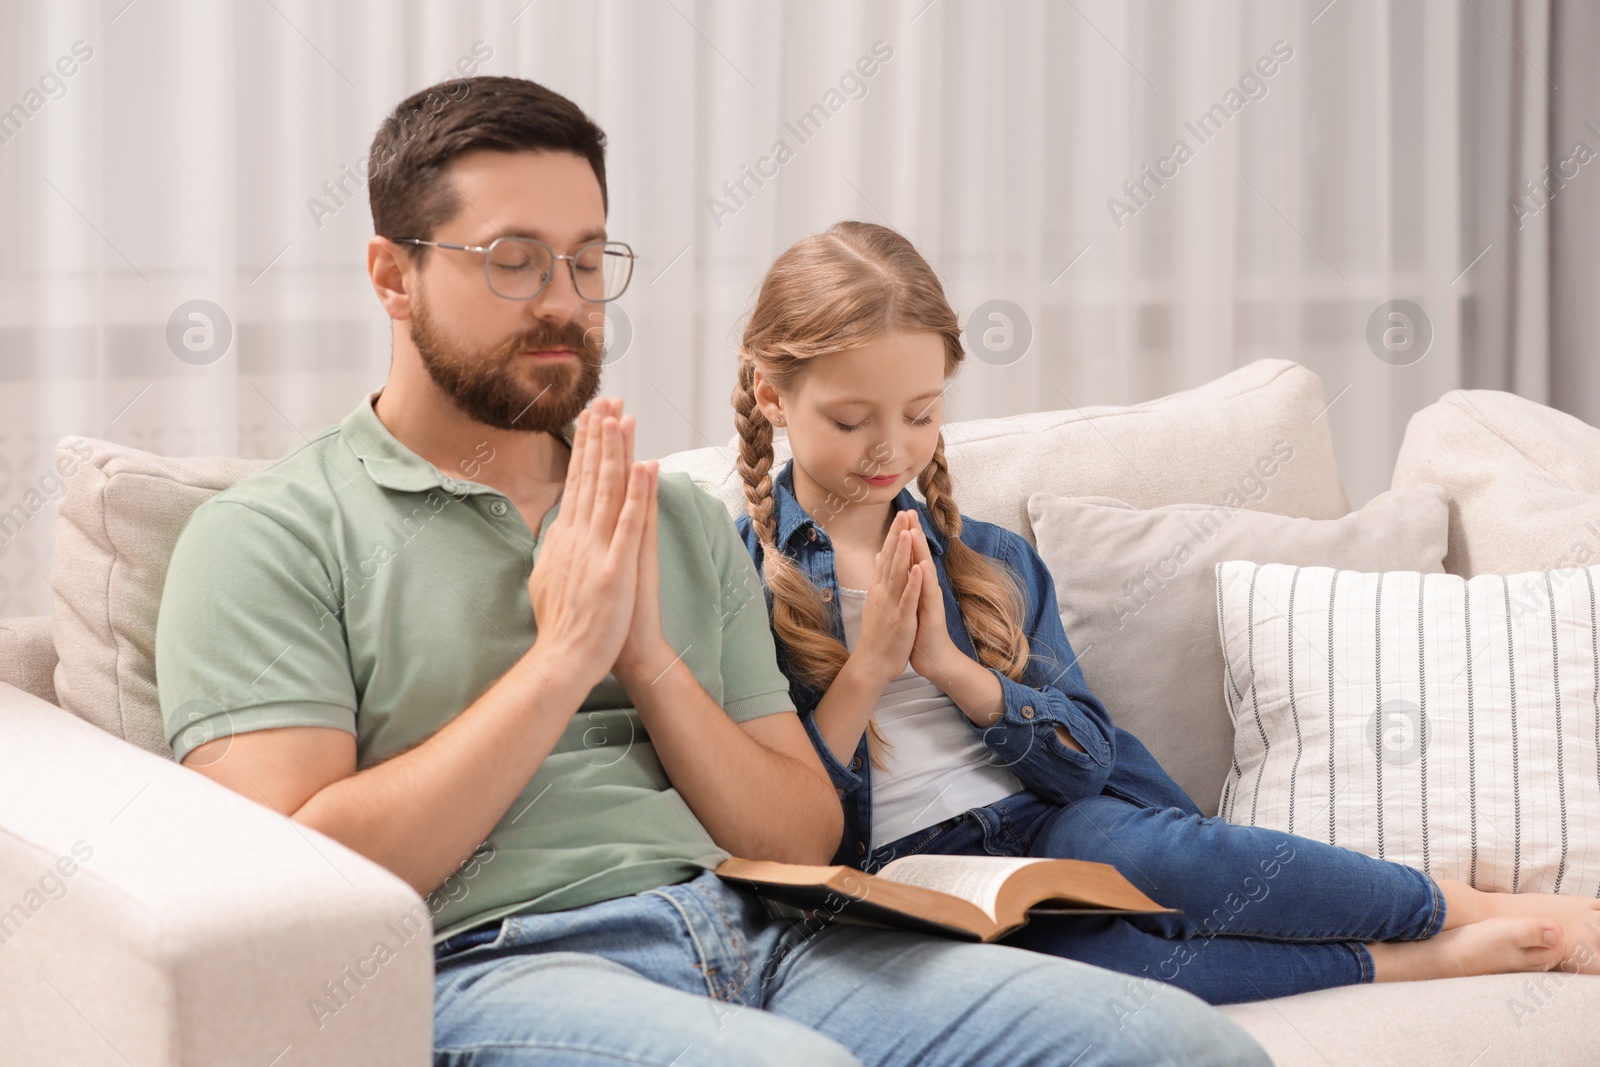 Photo of Girl and her godparent praying over Bible together on sofa at home